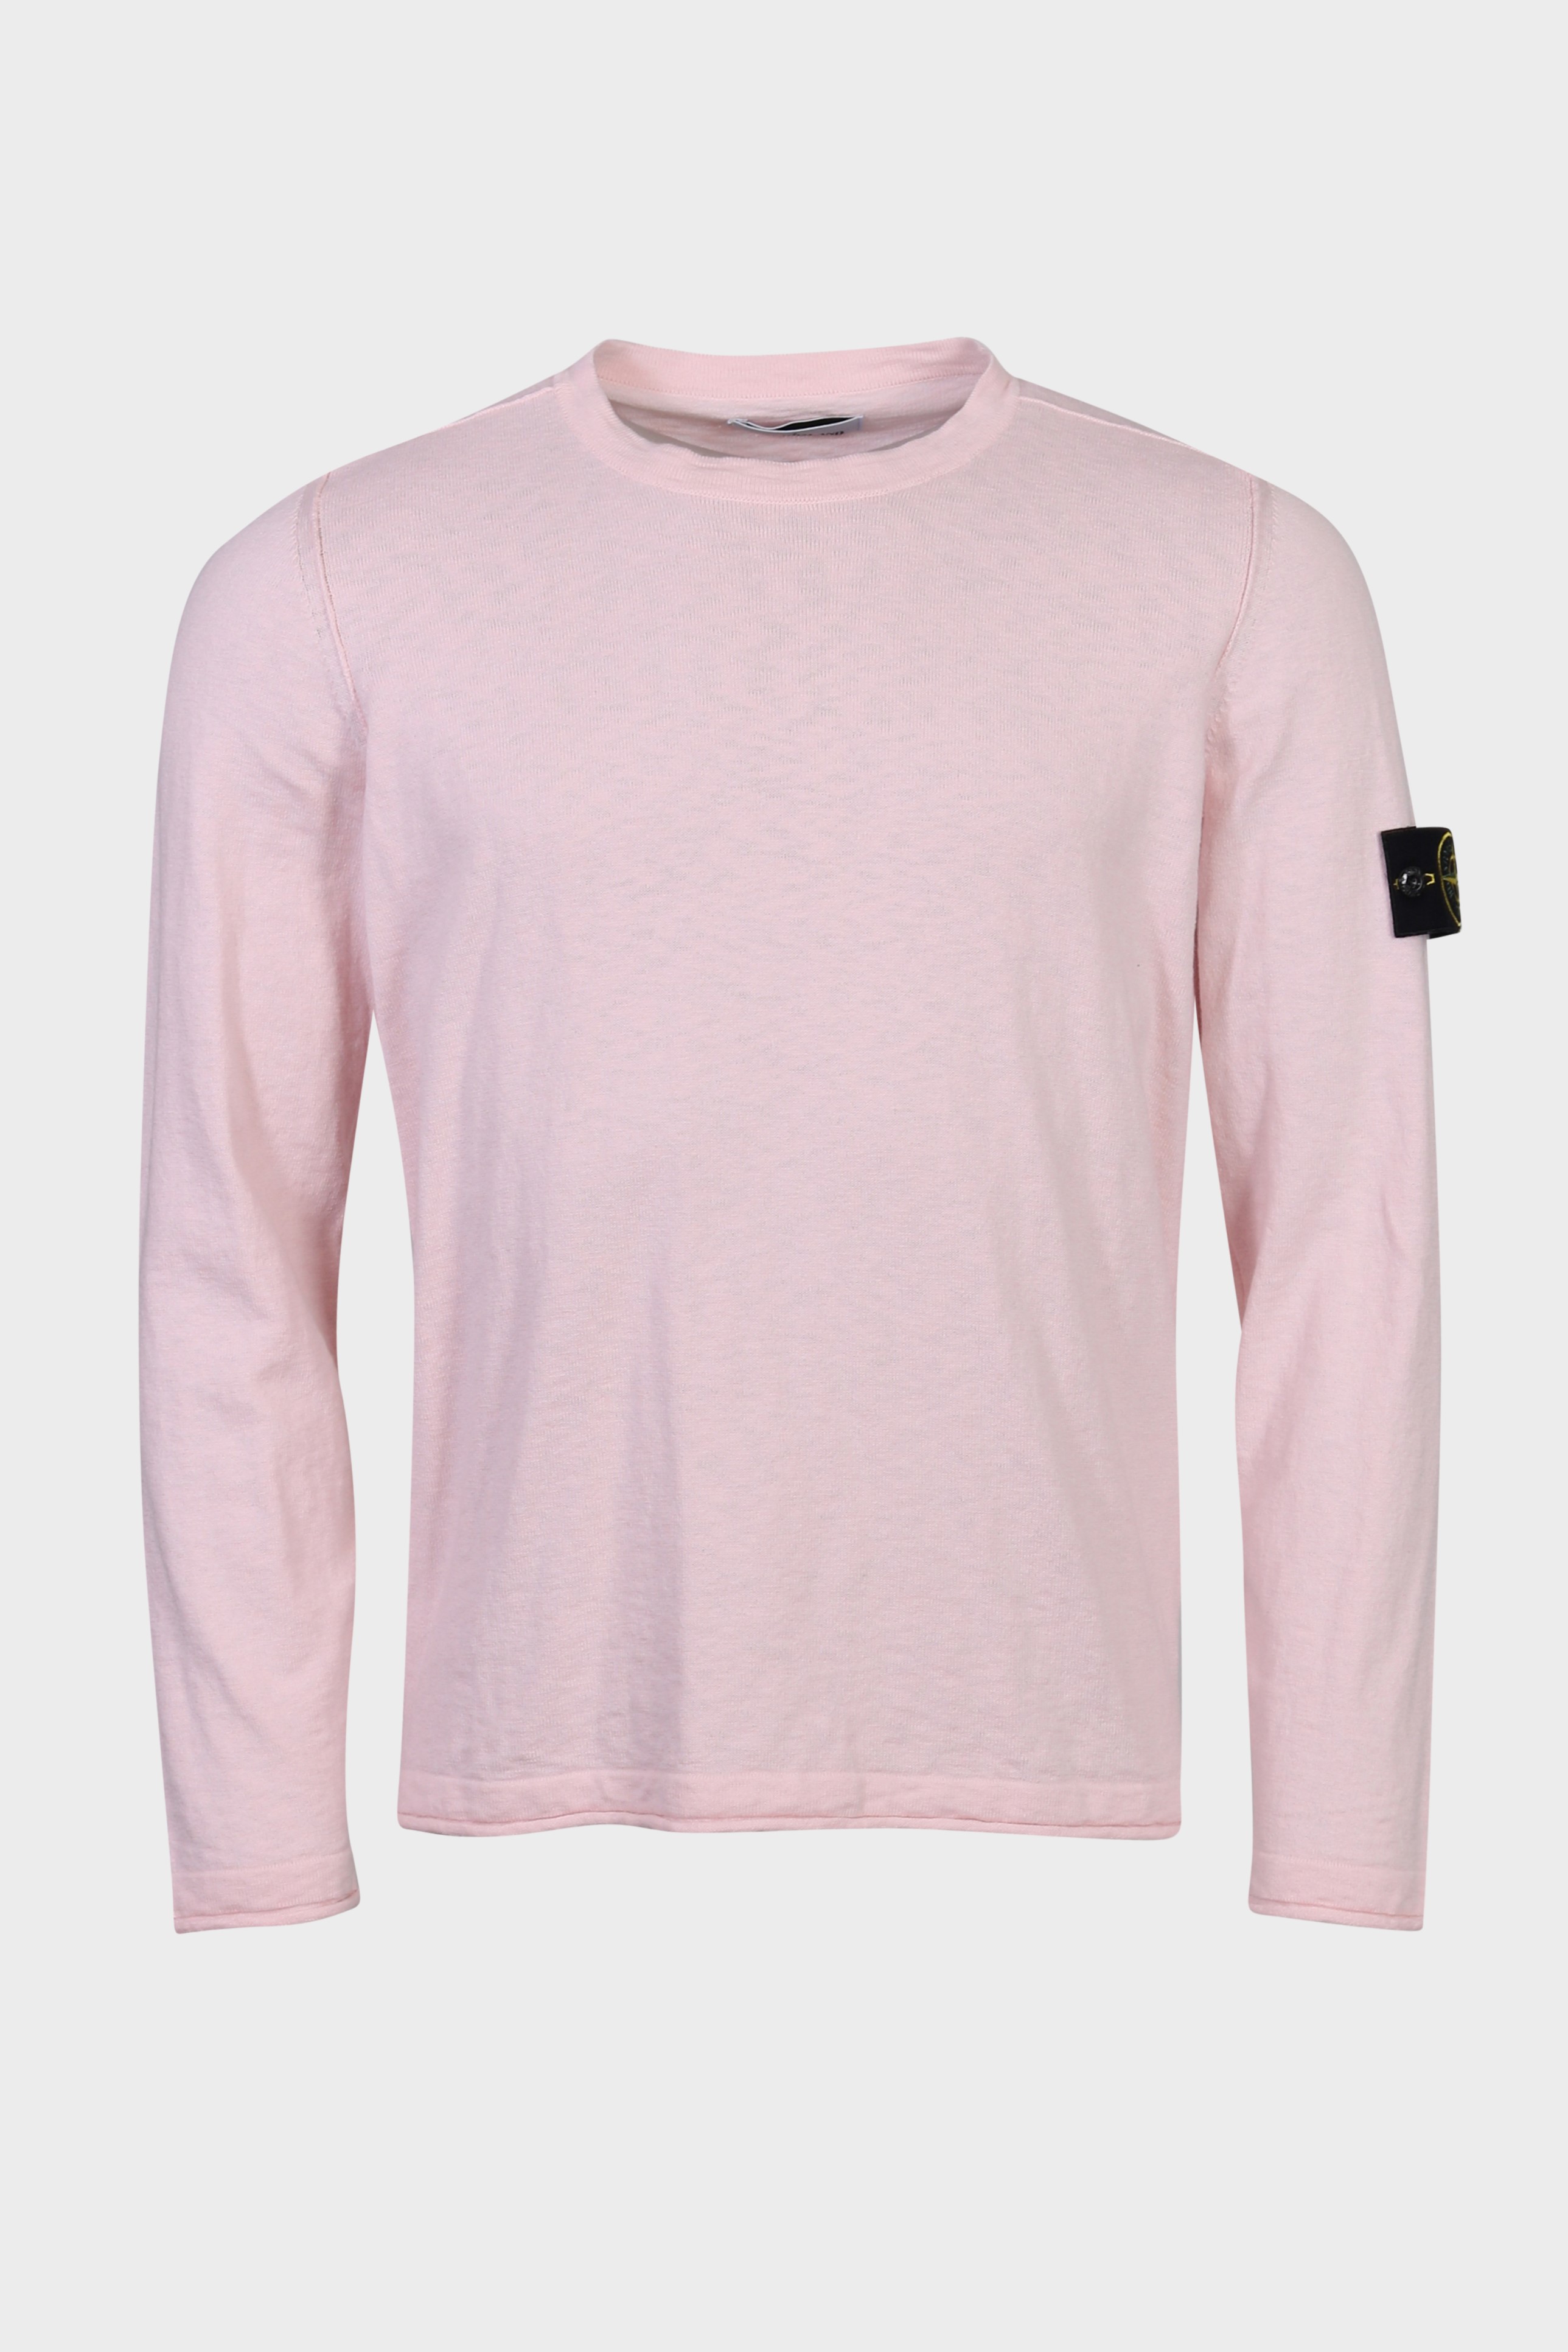 STONE ISLAND Summer Knit Pullover in Light Pink XL